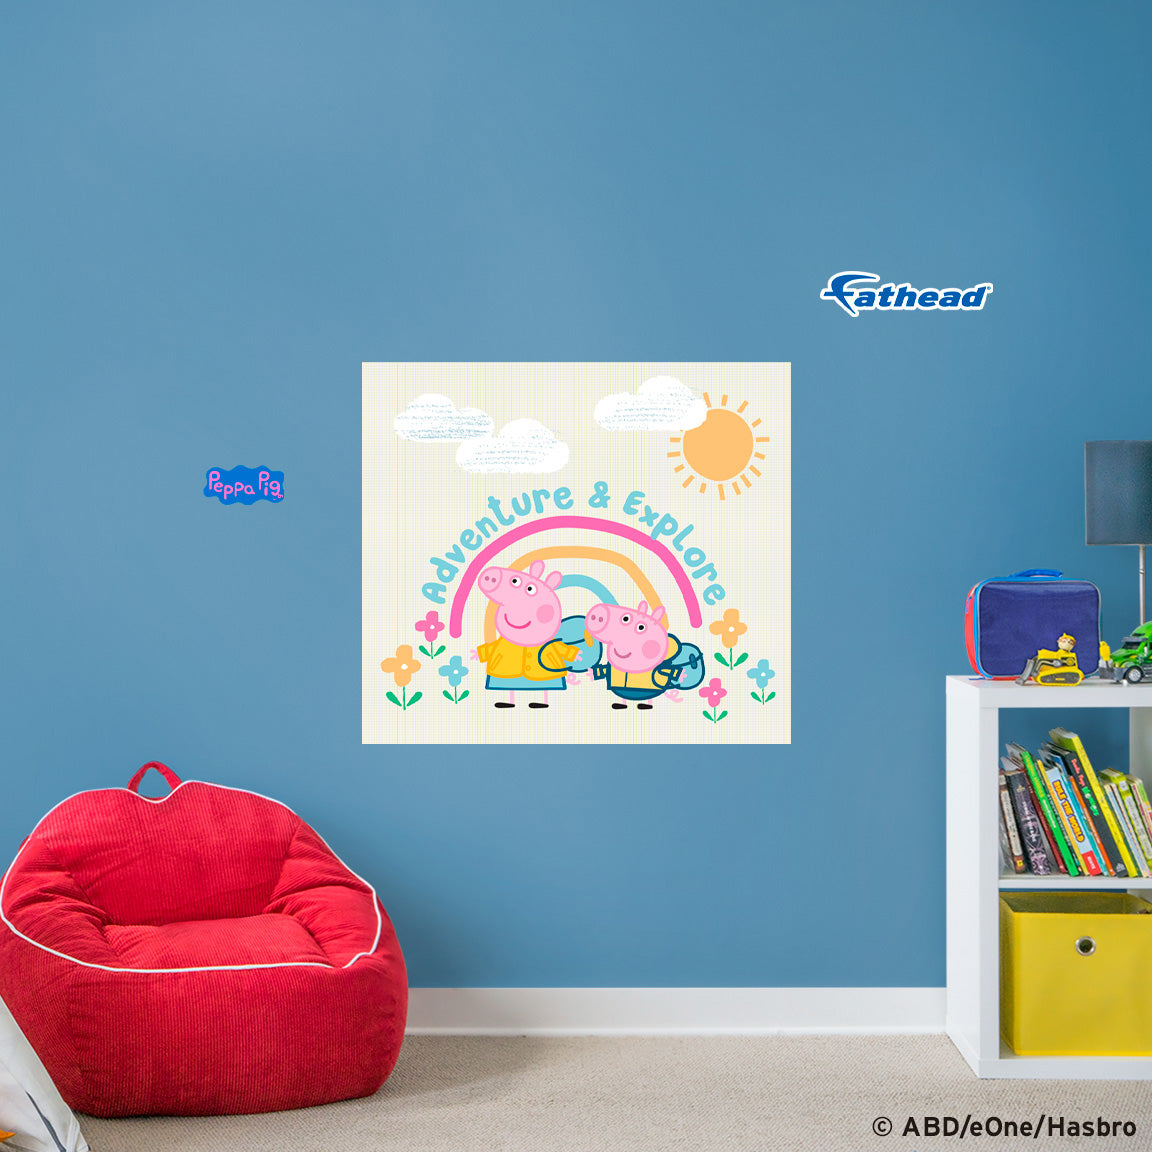 Peppa Pig: Adventure & Explore Poster - Officially Licensed Hasbro Removable Adhesive Decal